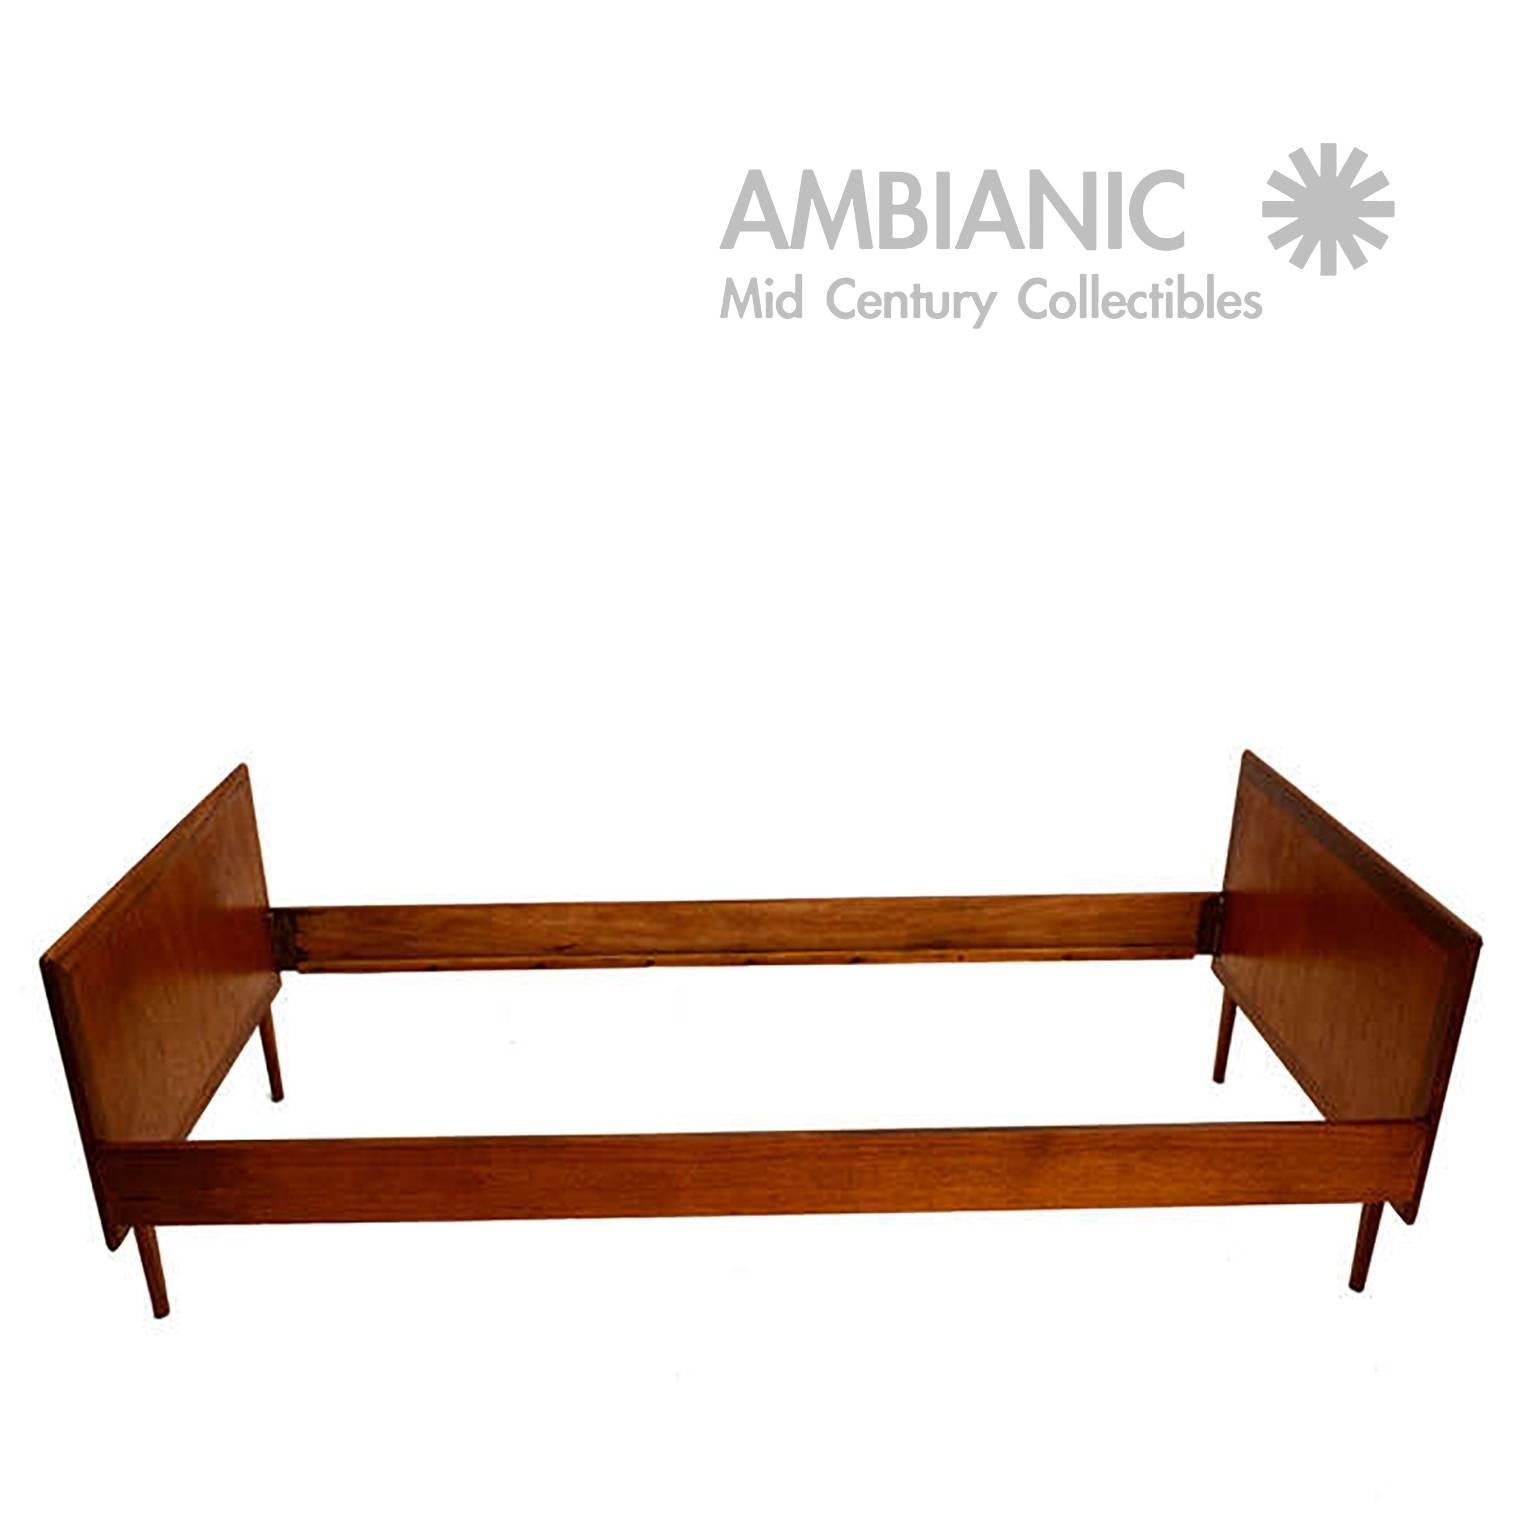 For your consideration a Danish modern single bed that can be used as a daybed. The headboard and footboard are finished on both sides and have the same dimensions. 

It can be taken apart for sage and easy shipping. Firm and sturdy. 
Wood slats